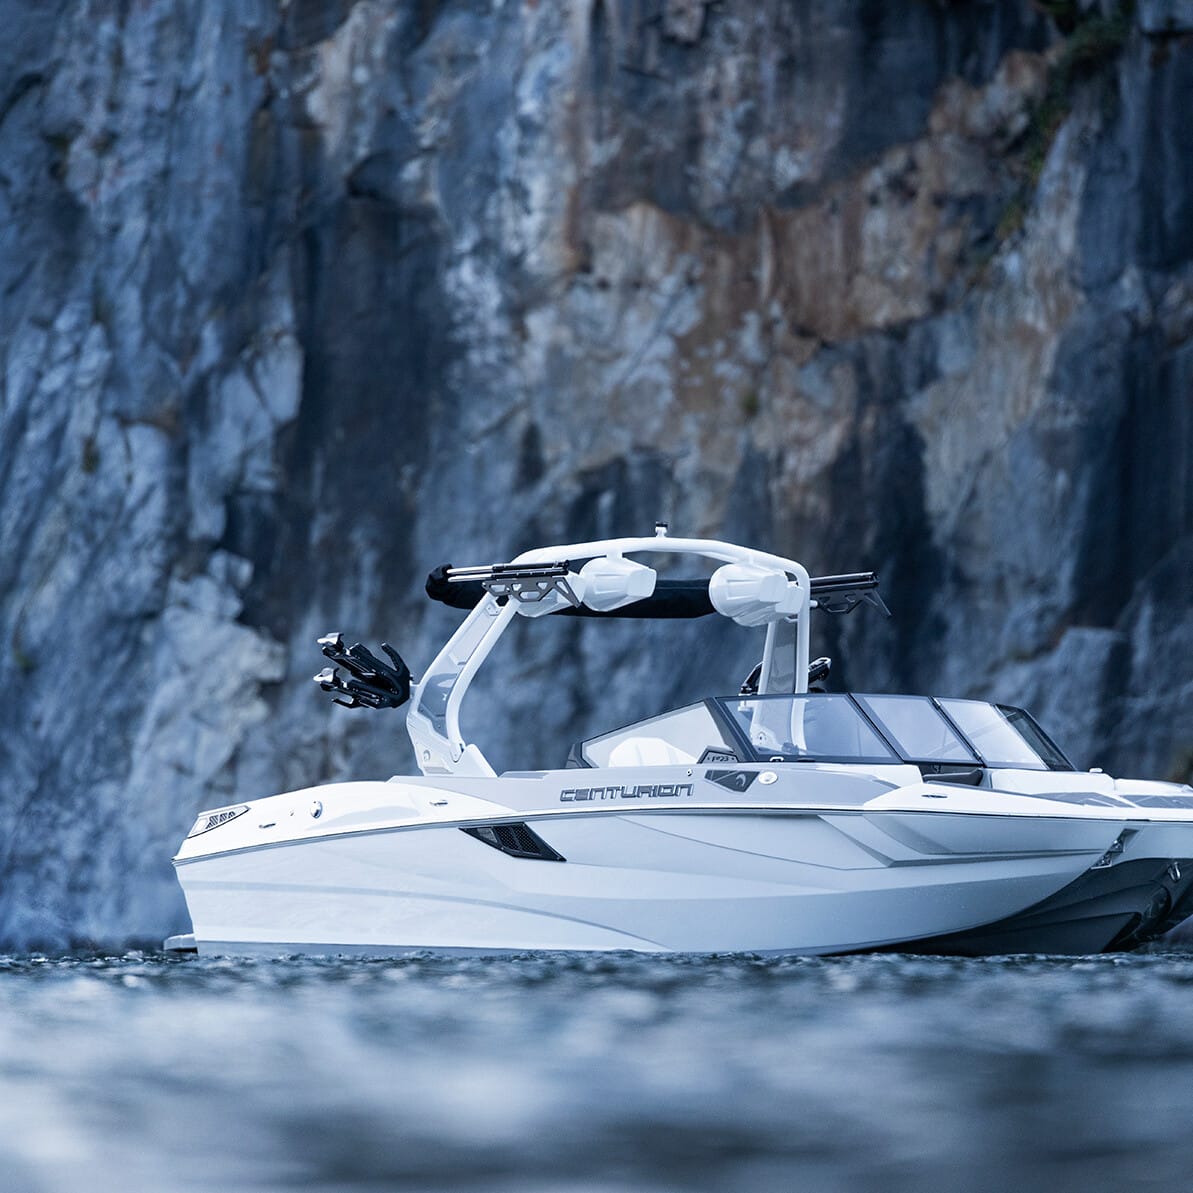 A white speedboat with a wakeboard tower floats on calm water near a rocky cliff.